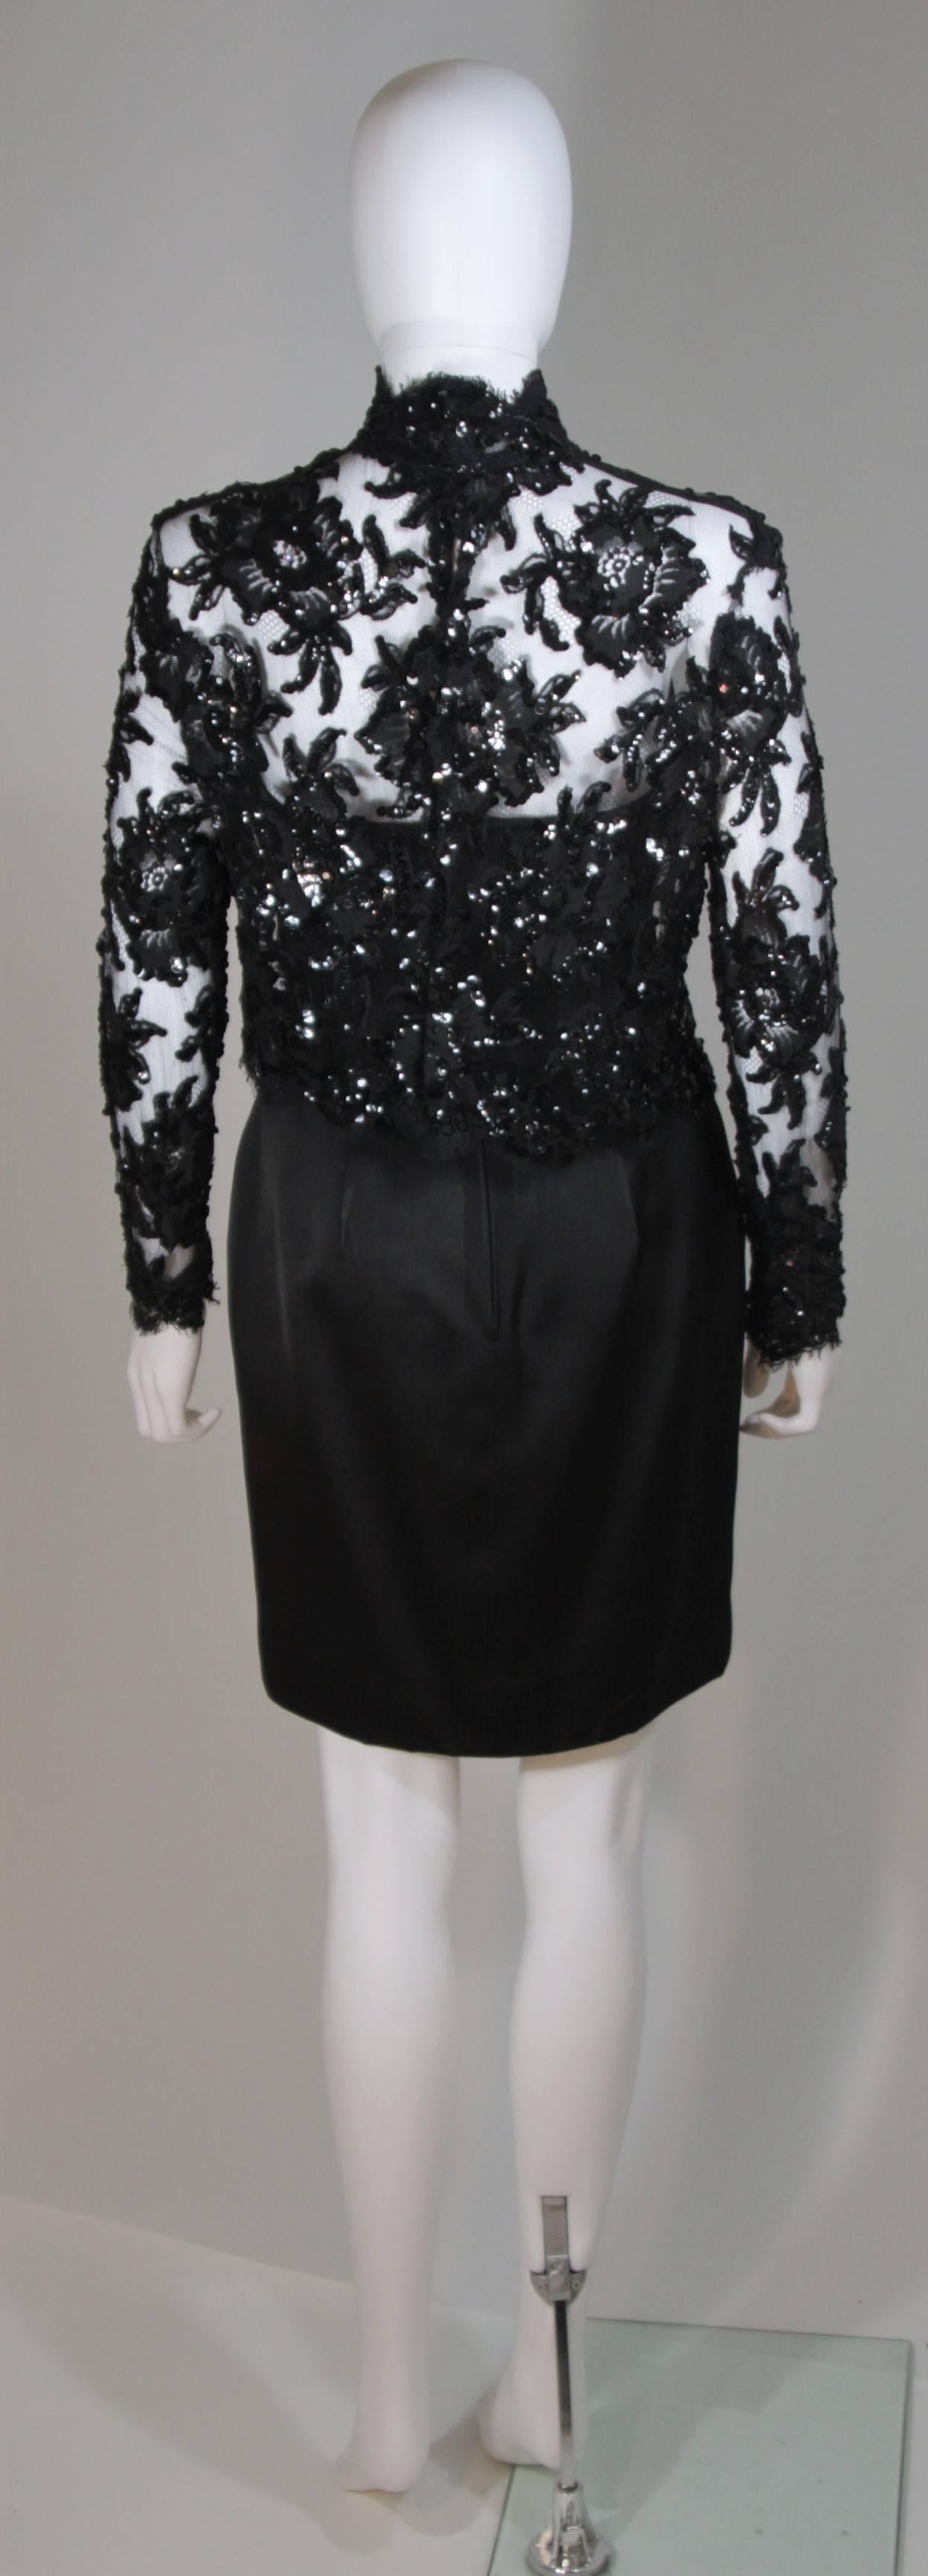 PATRICK KELLY Circa 1980's Black Sequin Lace Blouse and Cocktail Dress Size 4 2